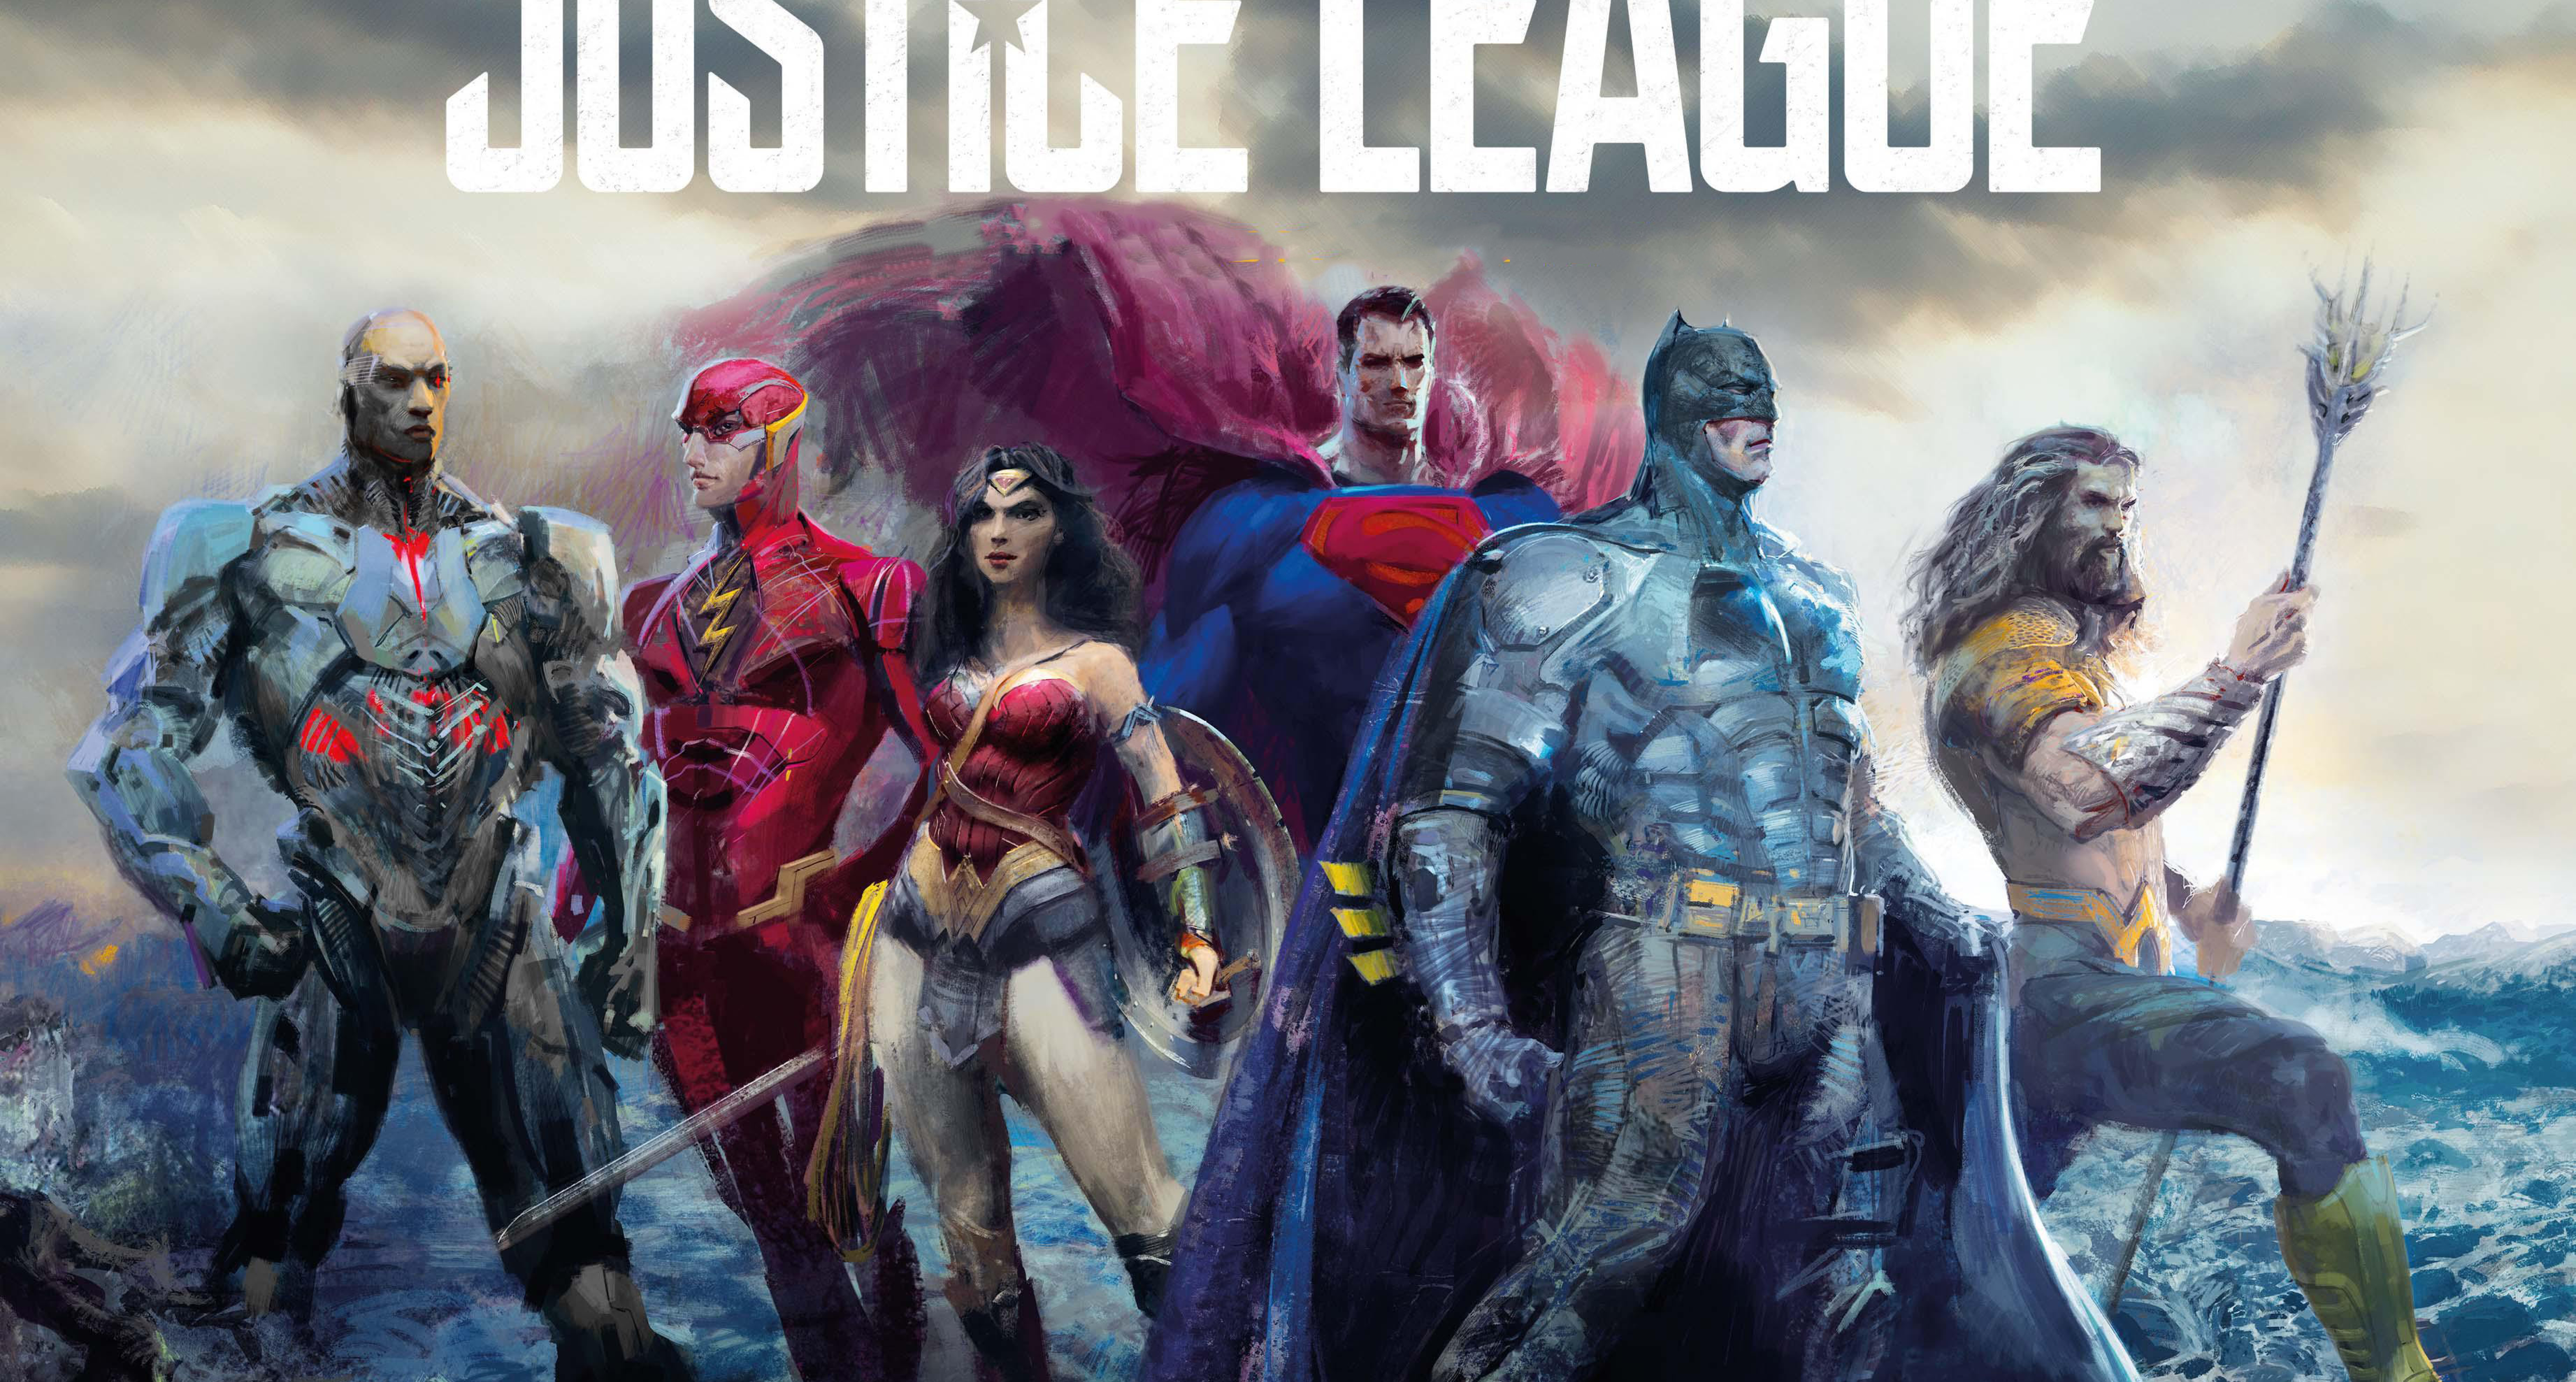 7680x4120 Justice League Poster Artwork 7680x4120 Resolution Wallpaper, HD  Movies 4K Wallpapers, Images, Photos and Background - Wallpapers Den